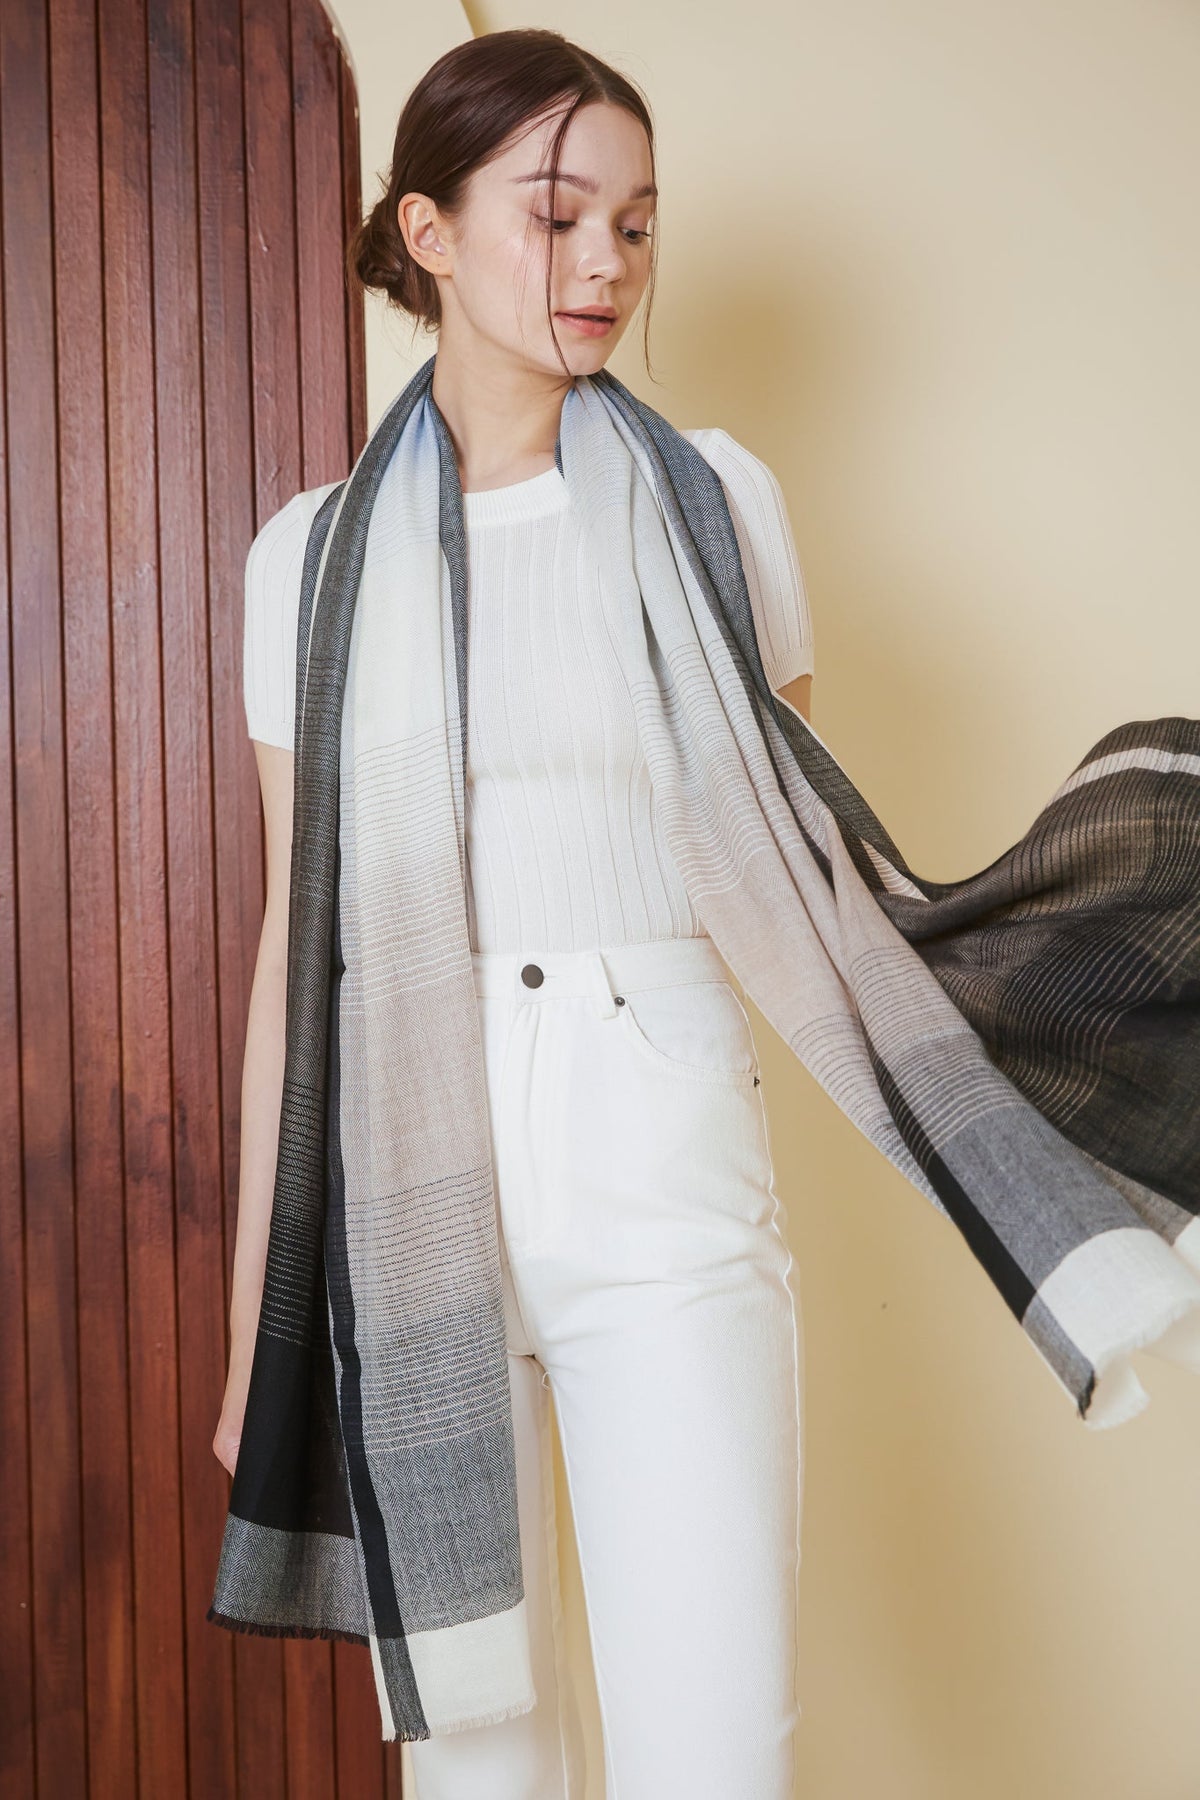 Restocked* Luxe Cashmere Shawl in Blue Grey Gradient